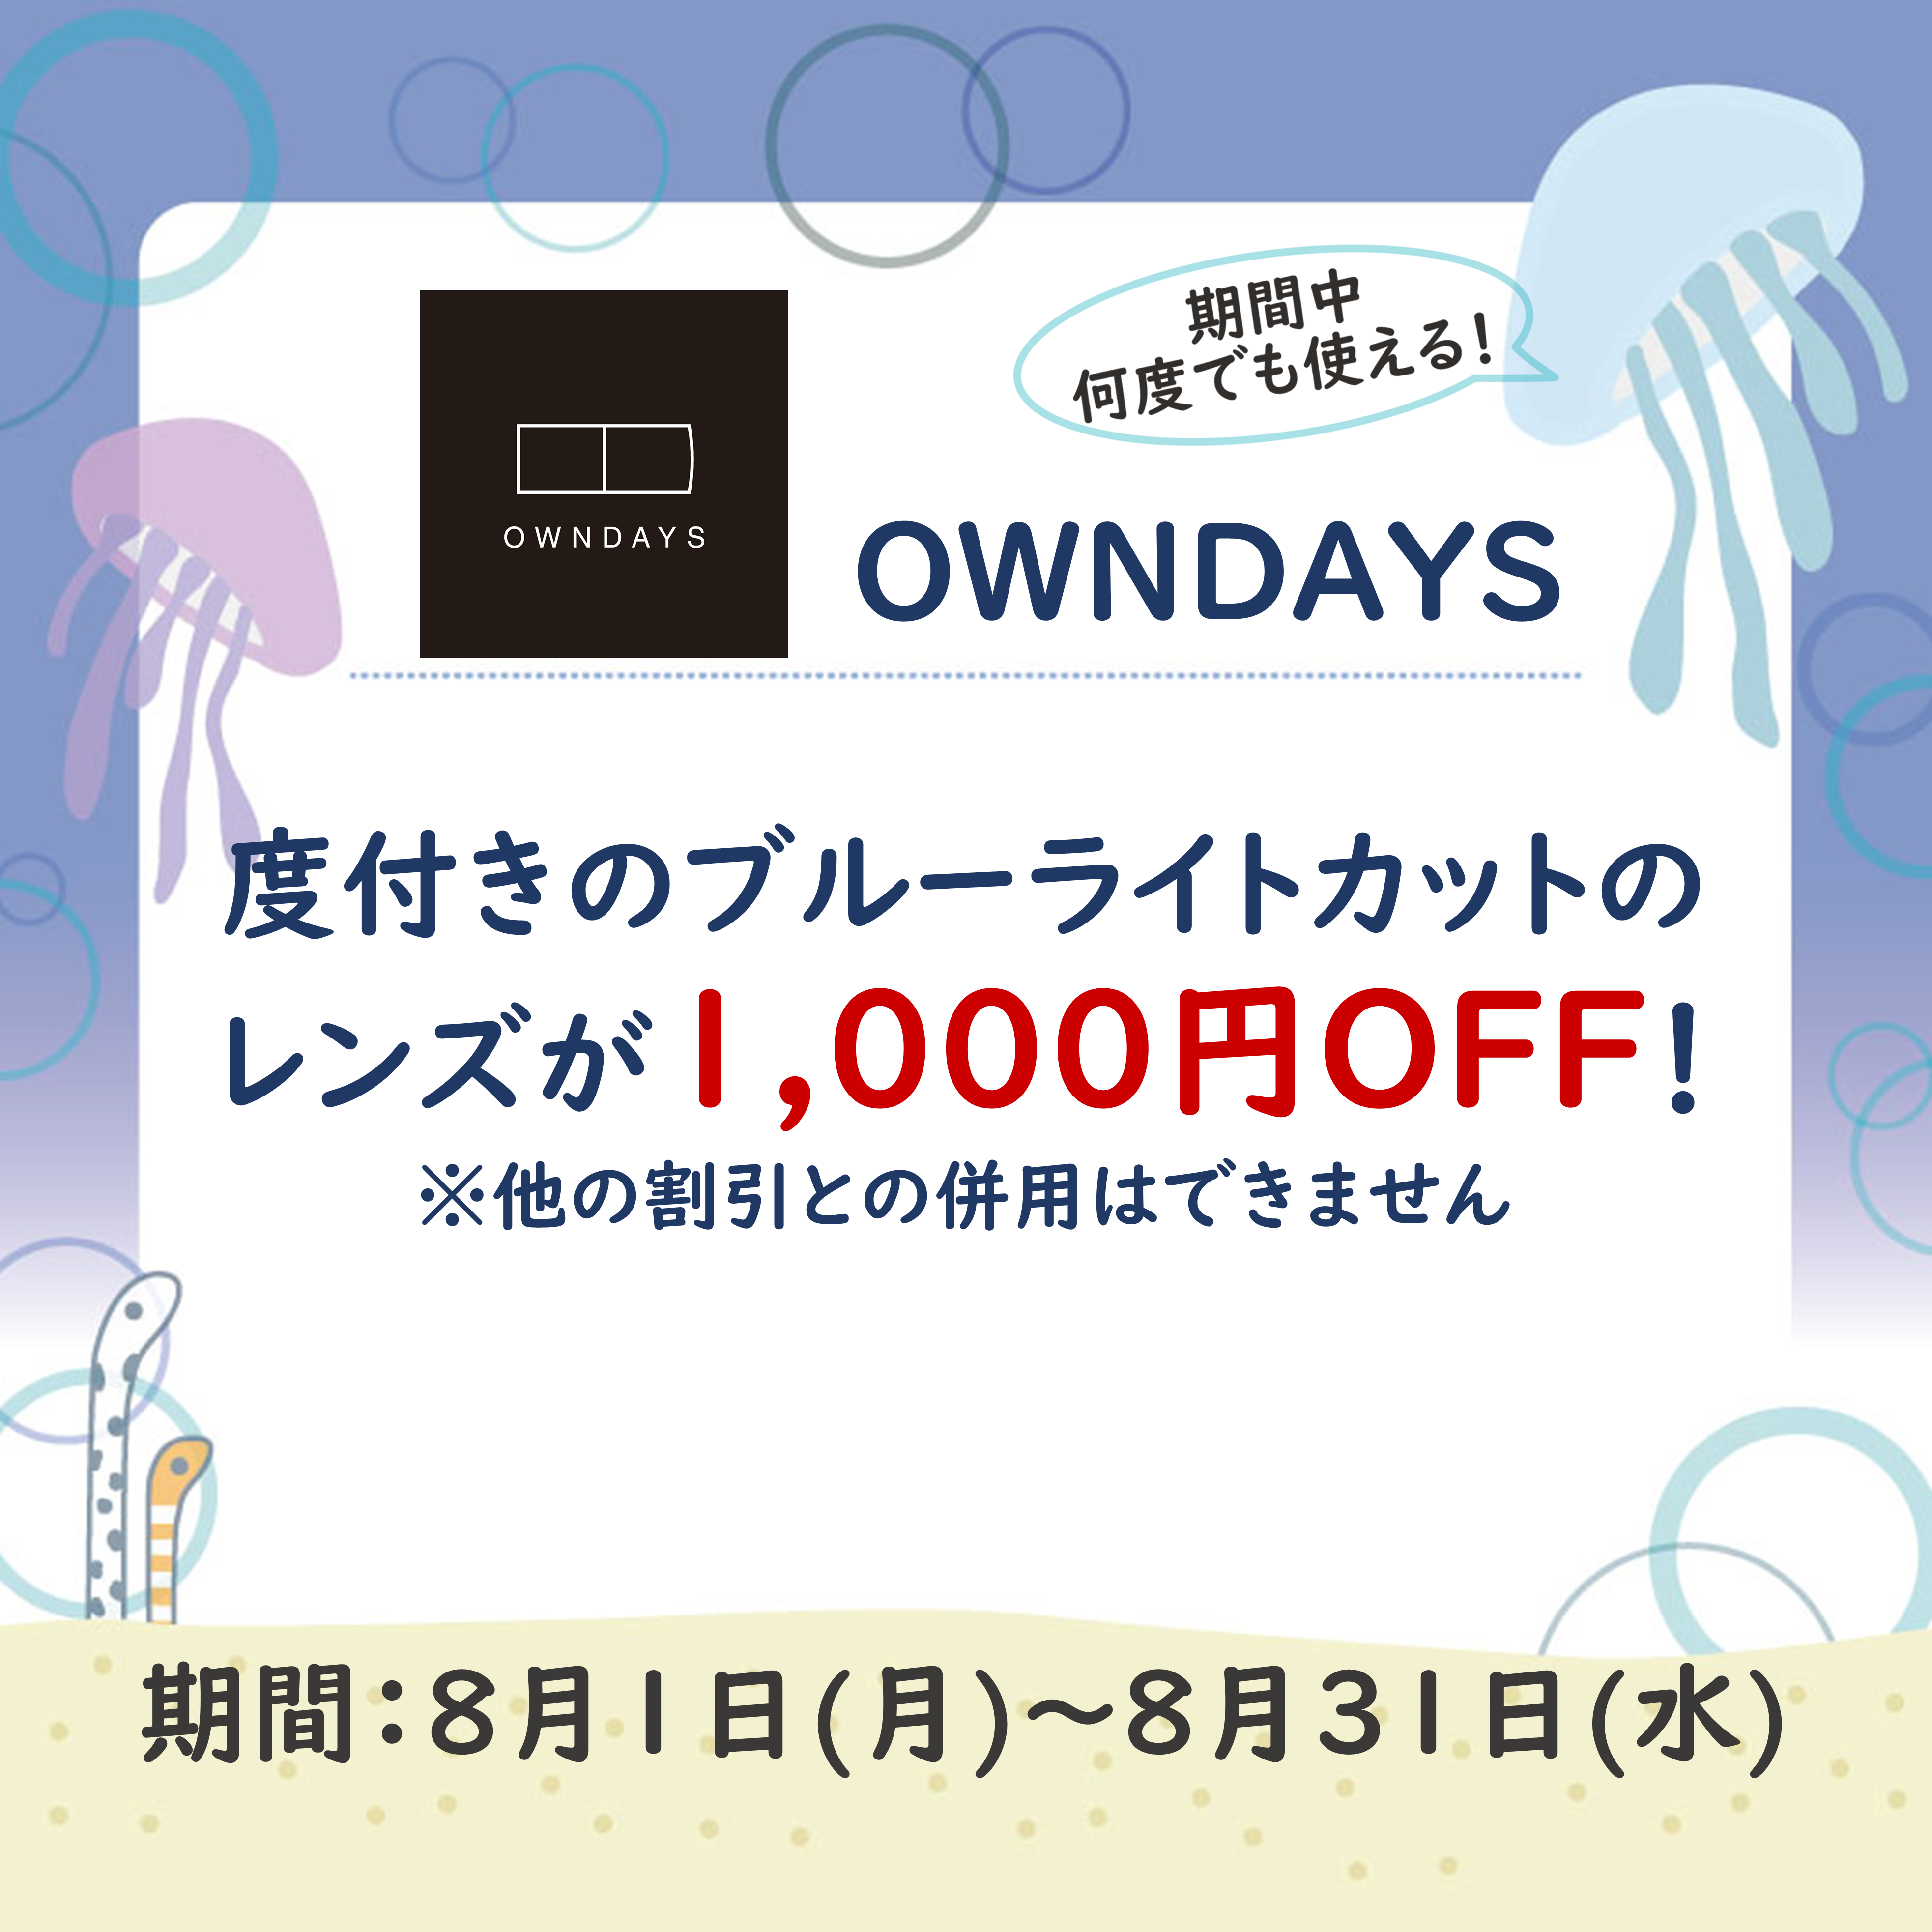 3_OWNDAYS.PNG